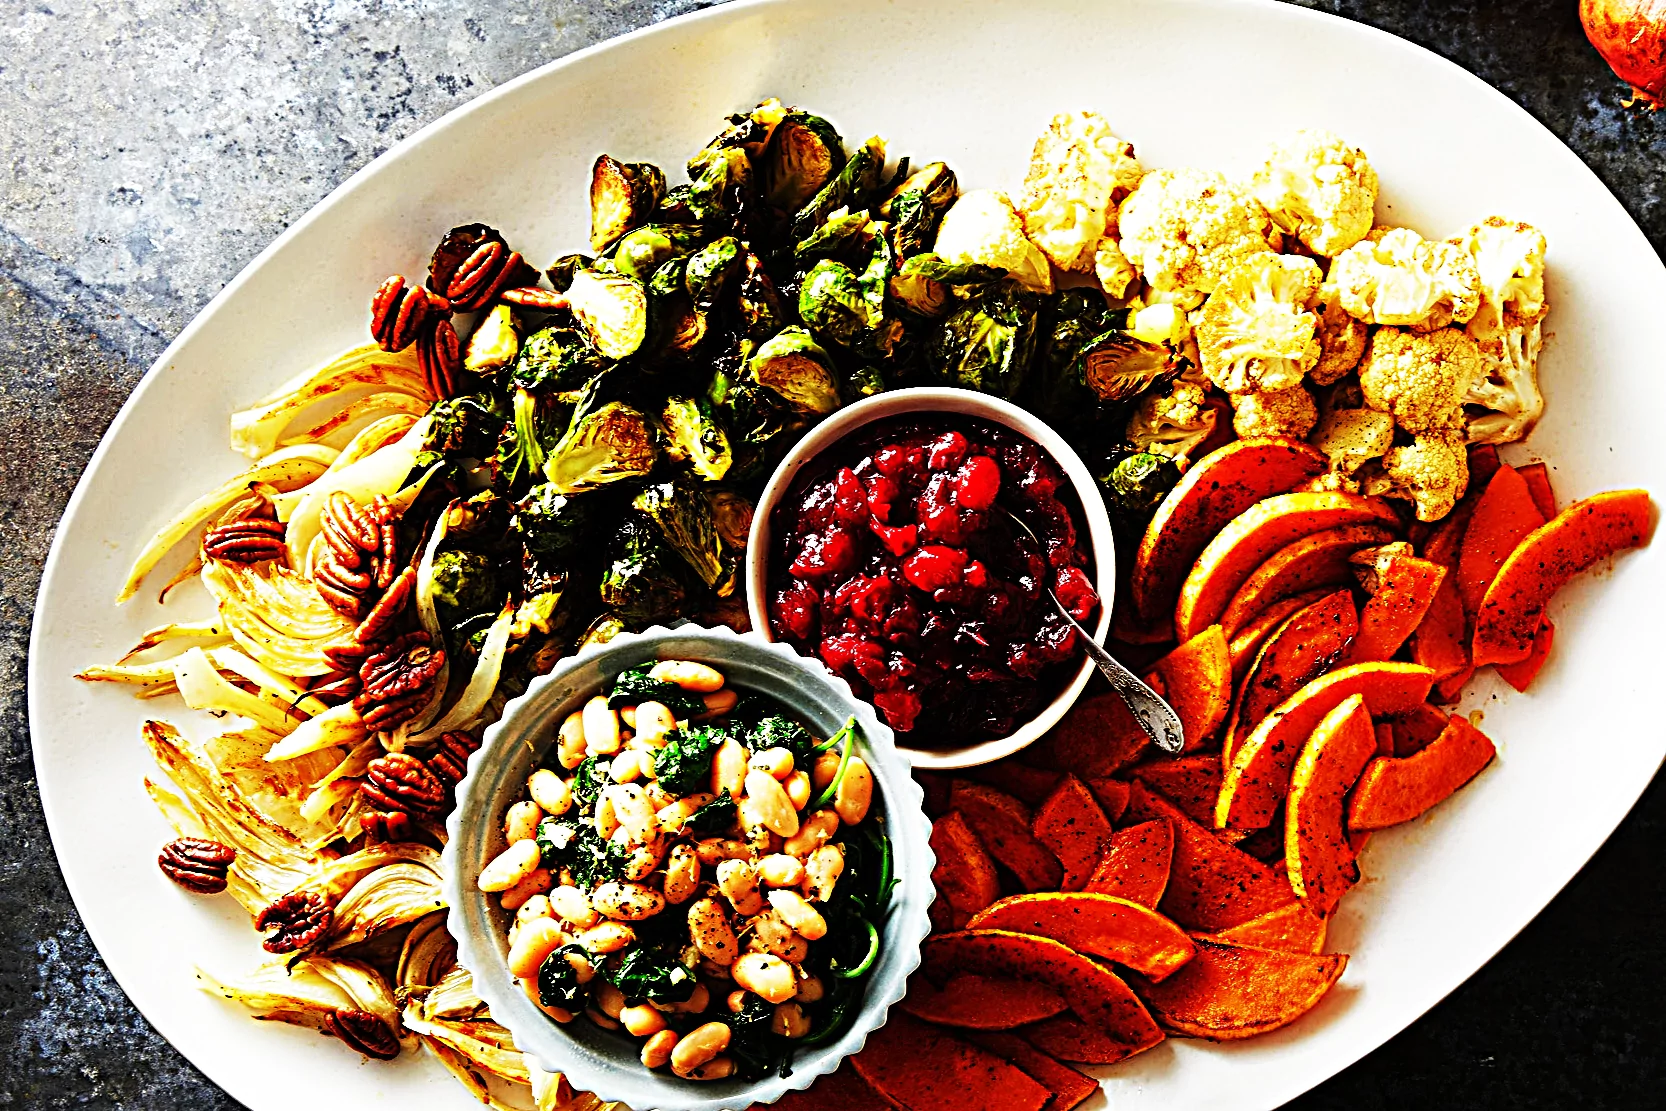 Stupid-Easy Recipe for Roasted Vegan Thanksgiving Feast Platter (#1 Top-Rated)